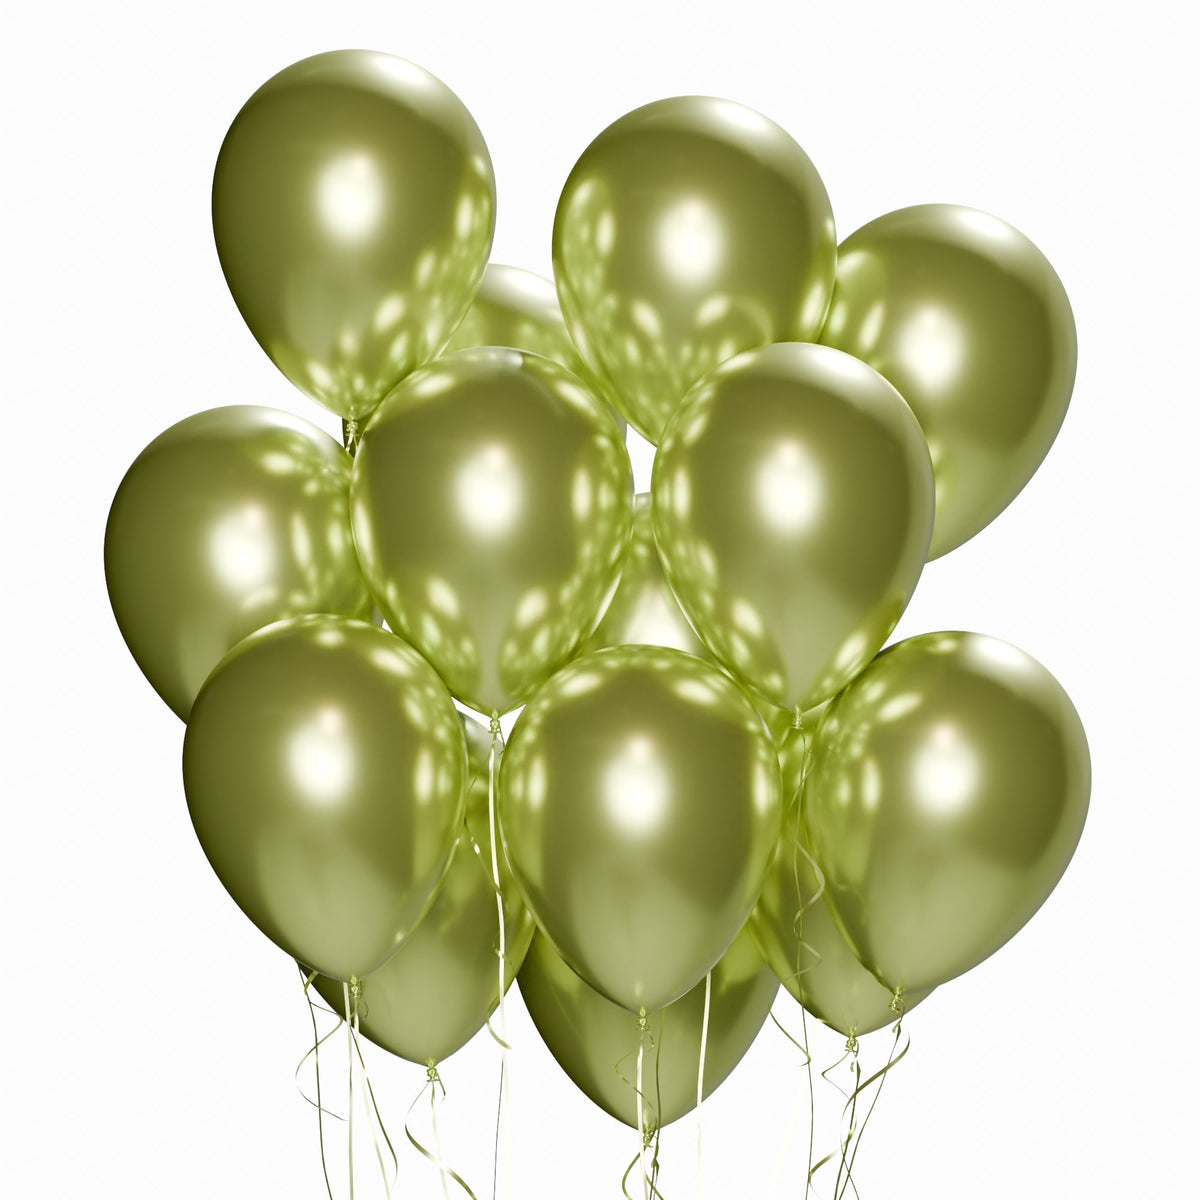 WIDE OCEAN INTERNATIONAL TRADE BEIJING CO., LTD Balloons Light Green Latex Balloon 12 Inches, Chrome Collection, 15 Count 810064198618